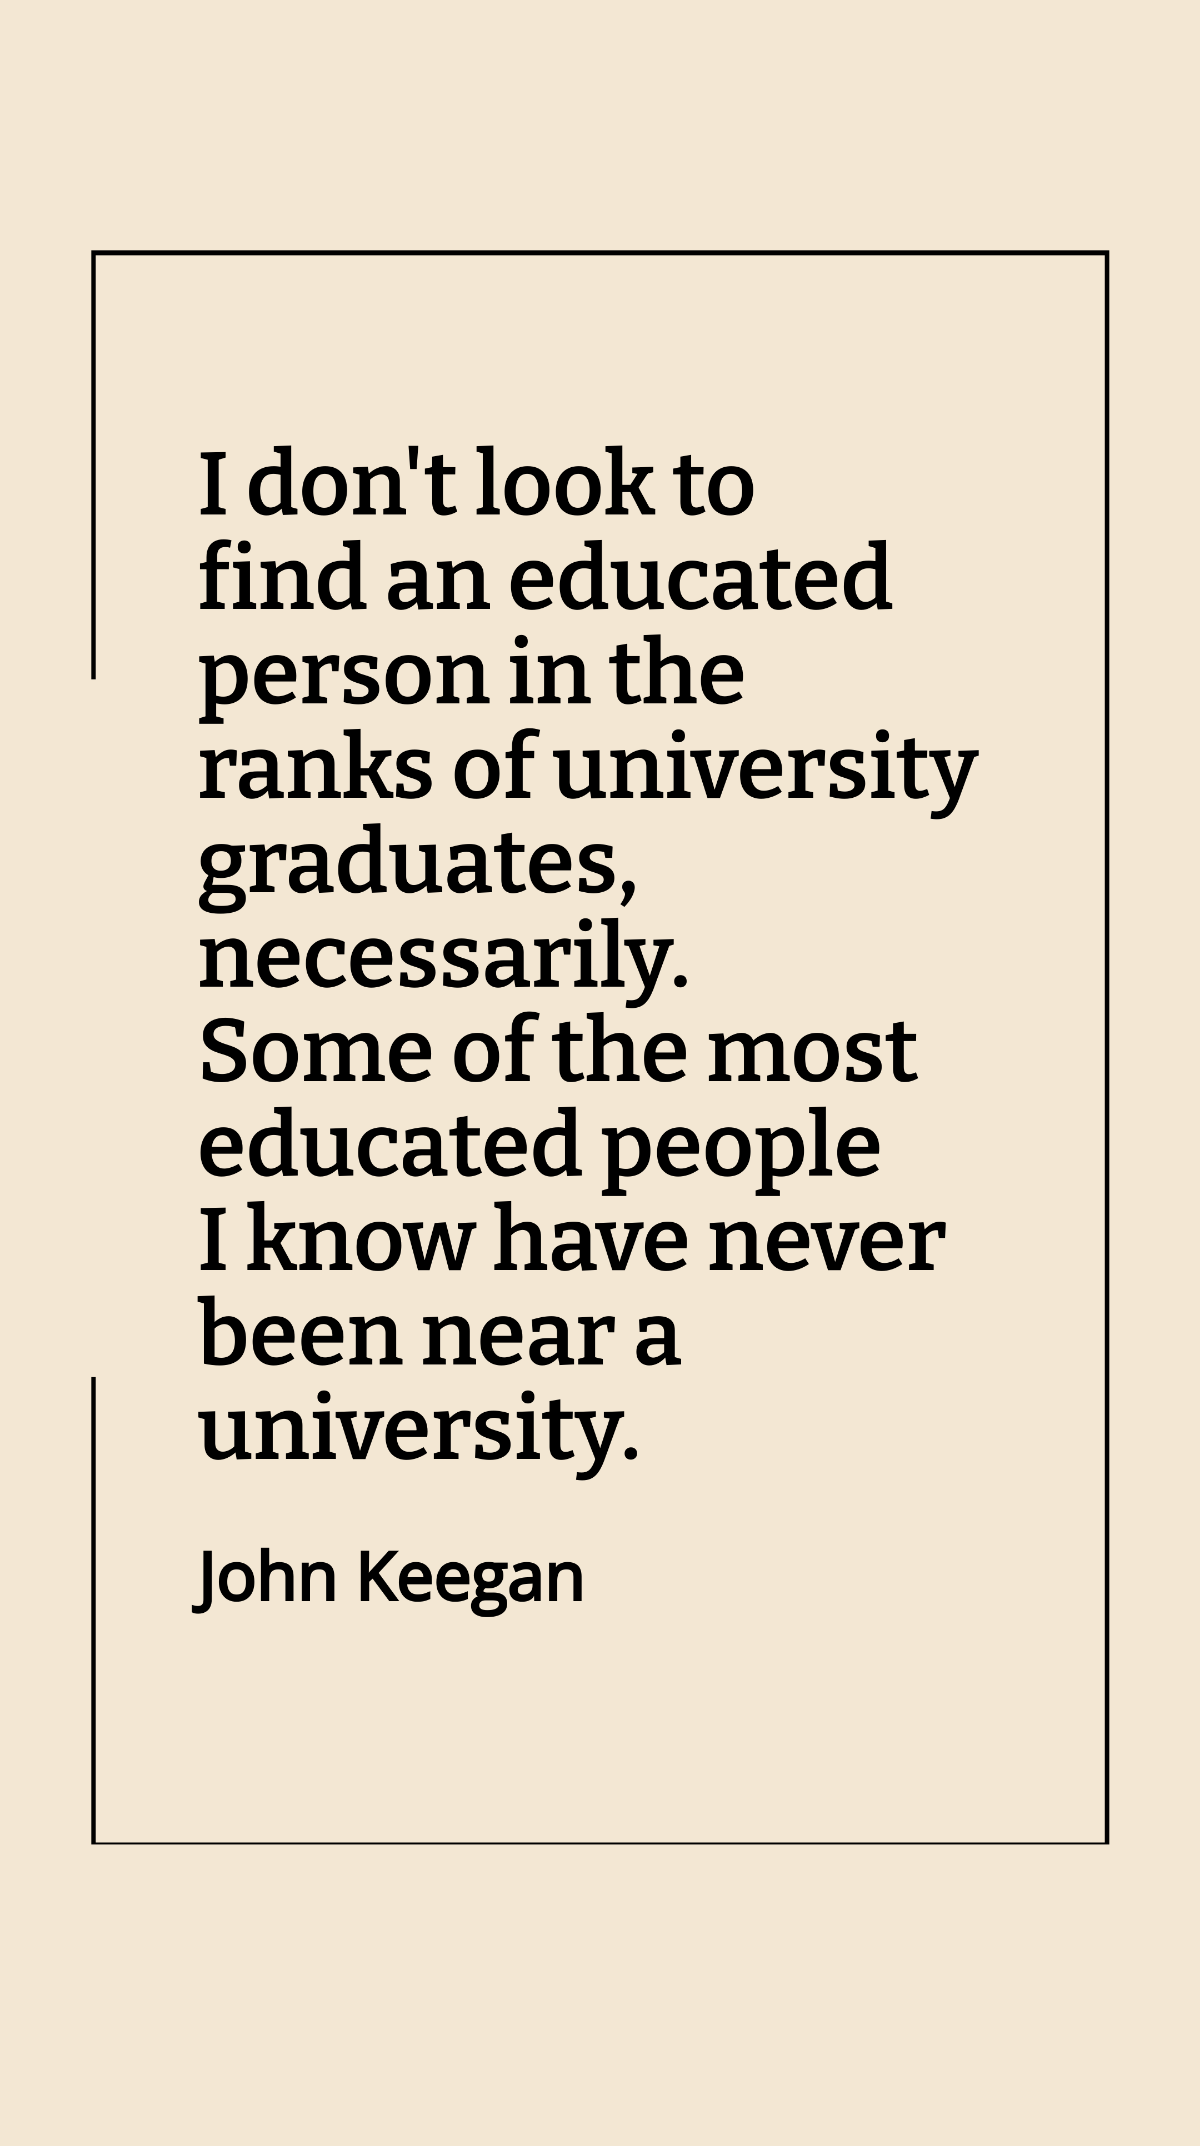 John Keegan - I don't look to find an educated person in the ranks of university graduates, necessarily. Some of the most educated people I know have never been near a university. Template